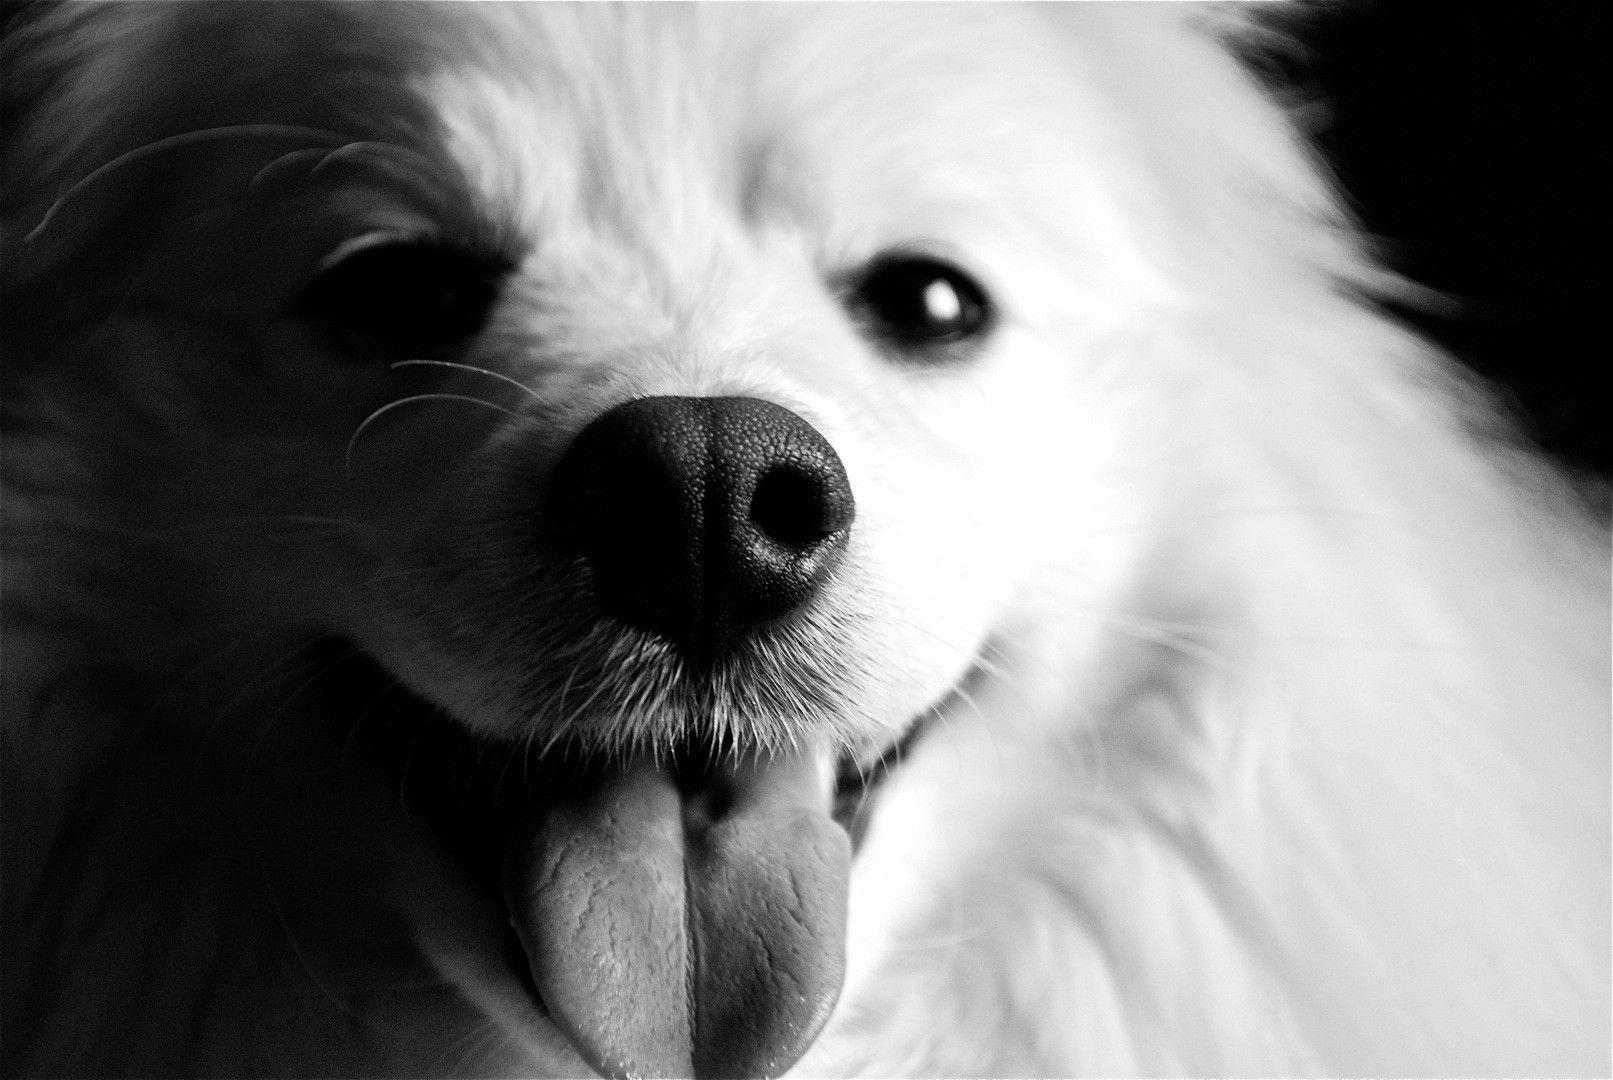 White Dog Wallpapers - Wallpaper Cave